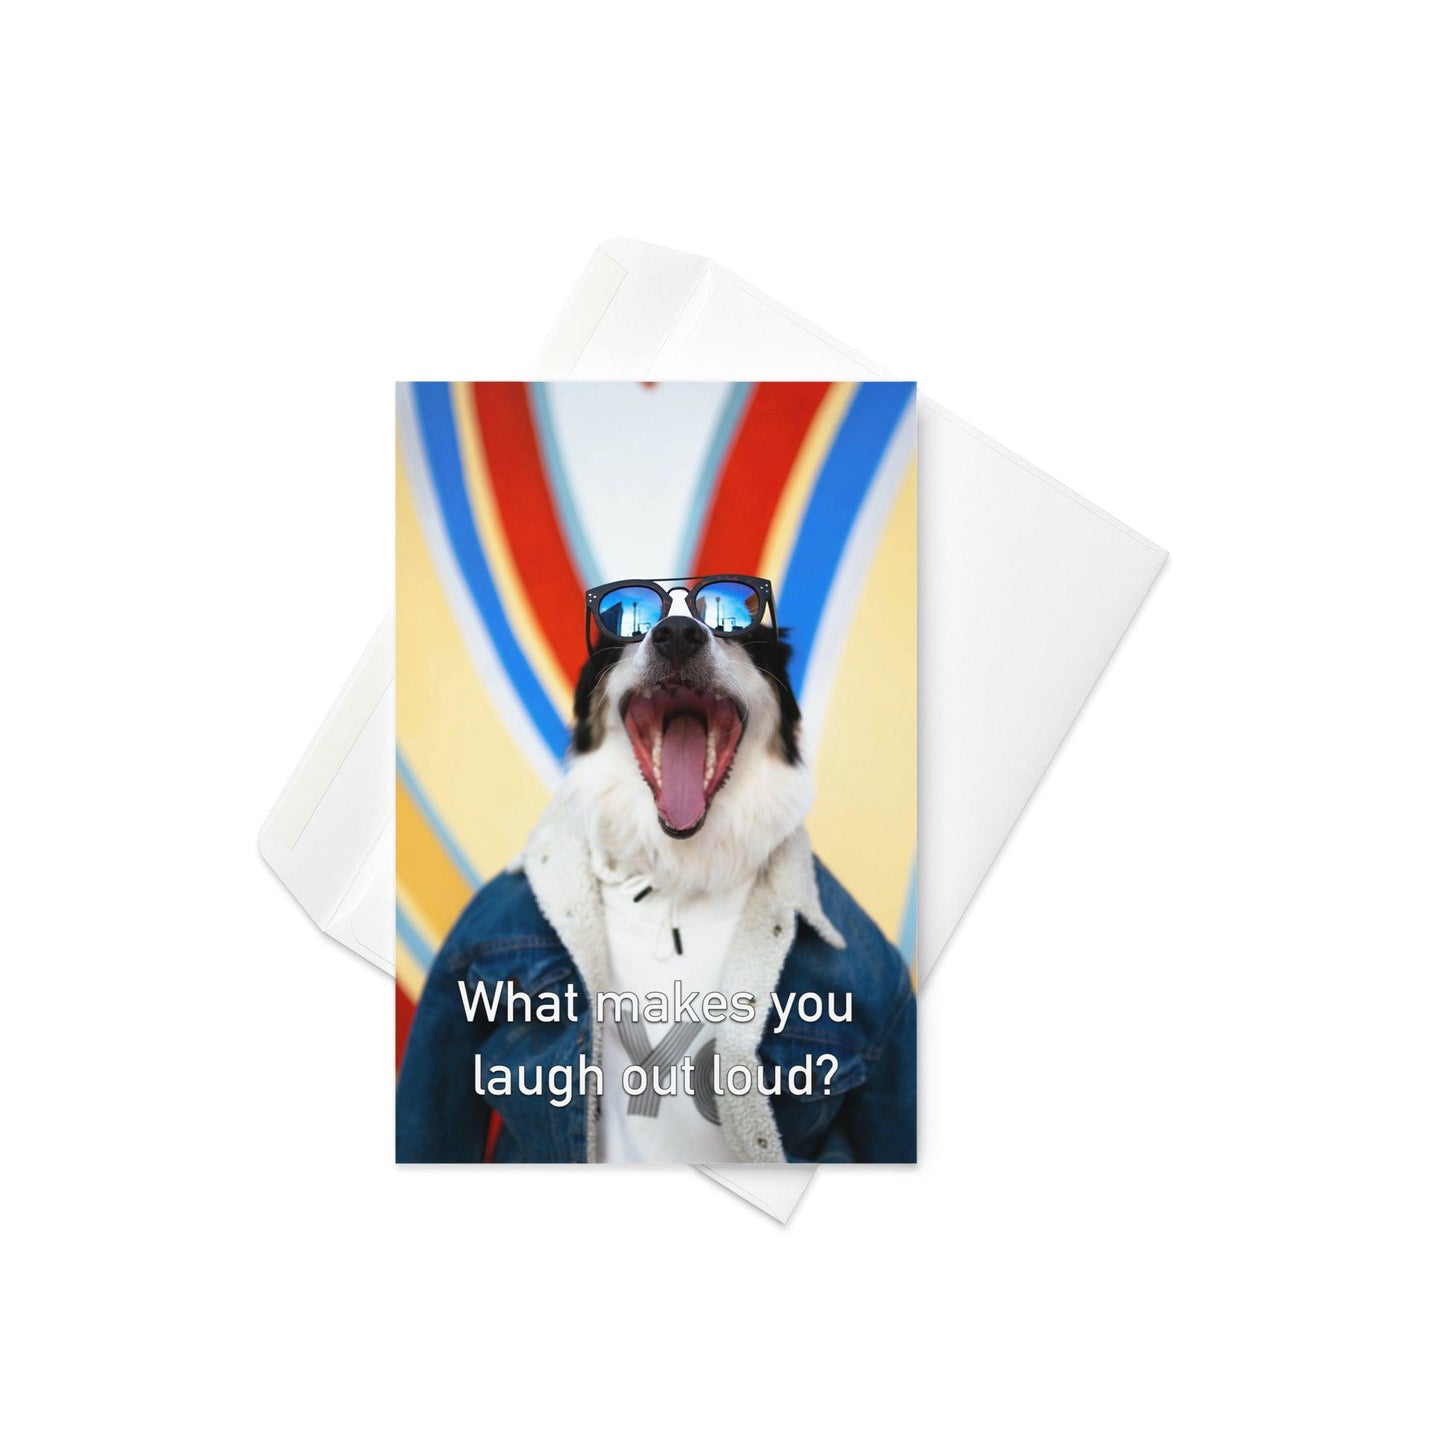 What Makes You Laugh Out Loud - Note Card - iSAW Company